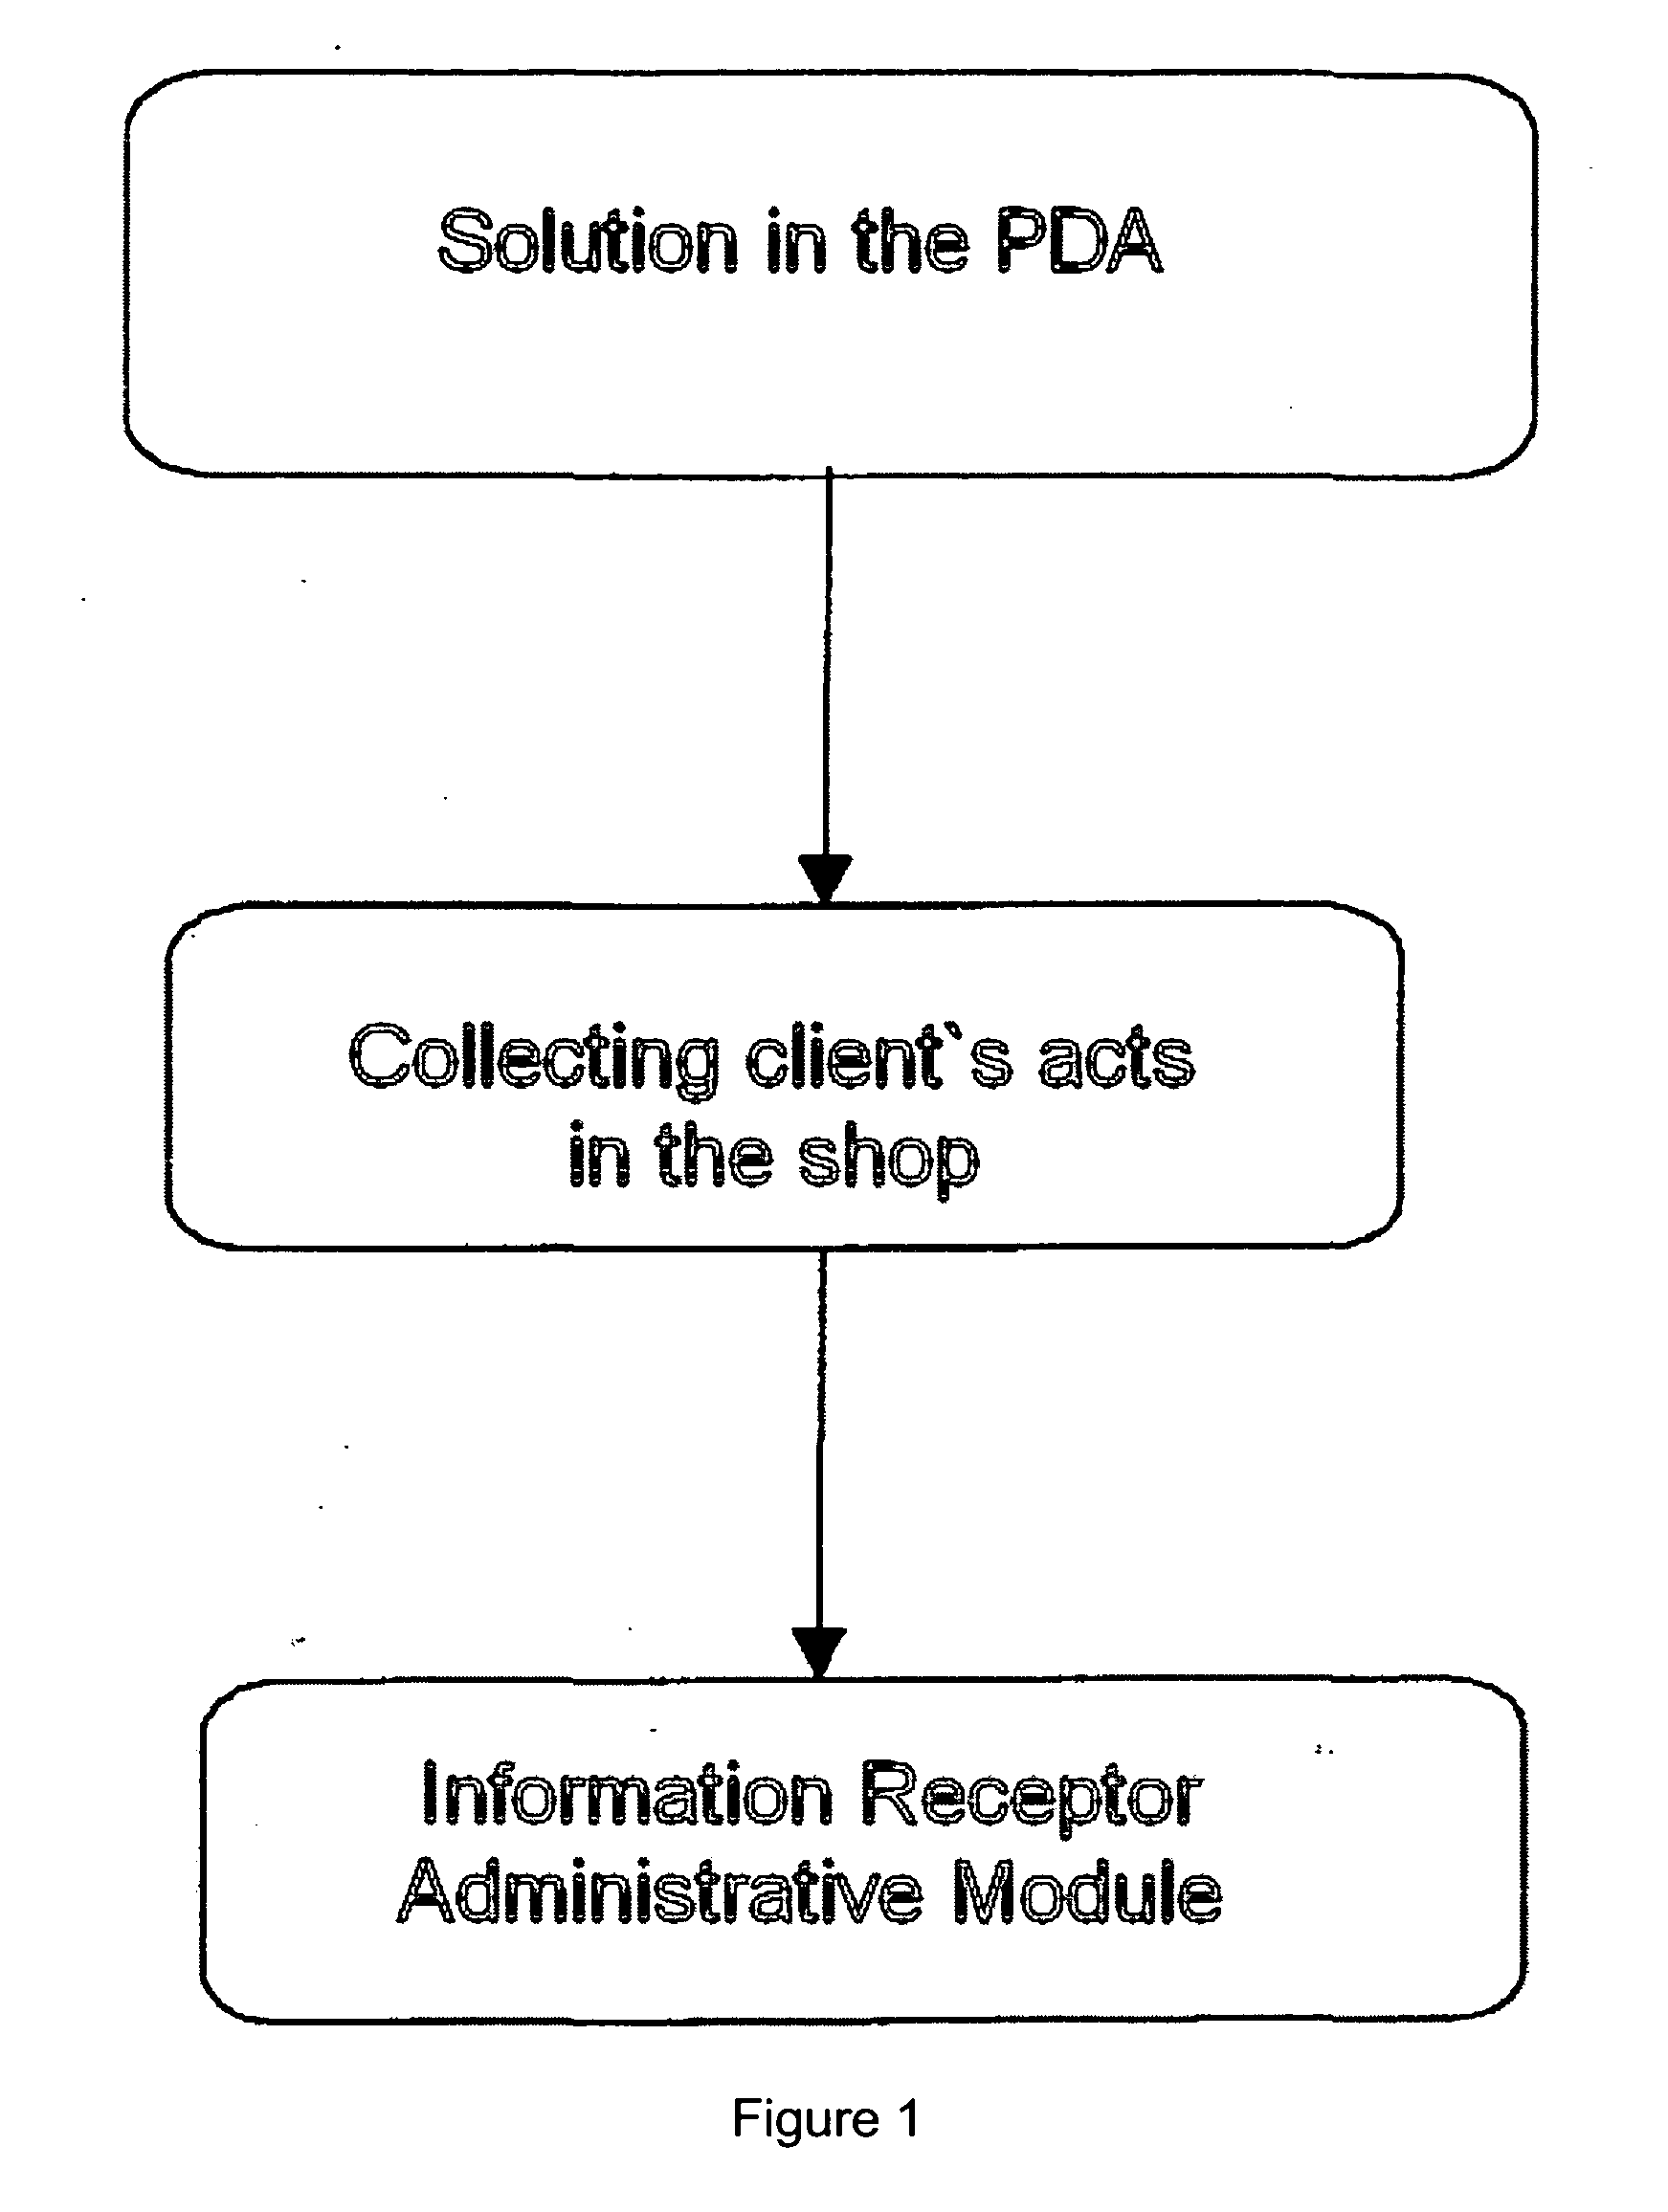 Automated data collection and management system